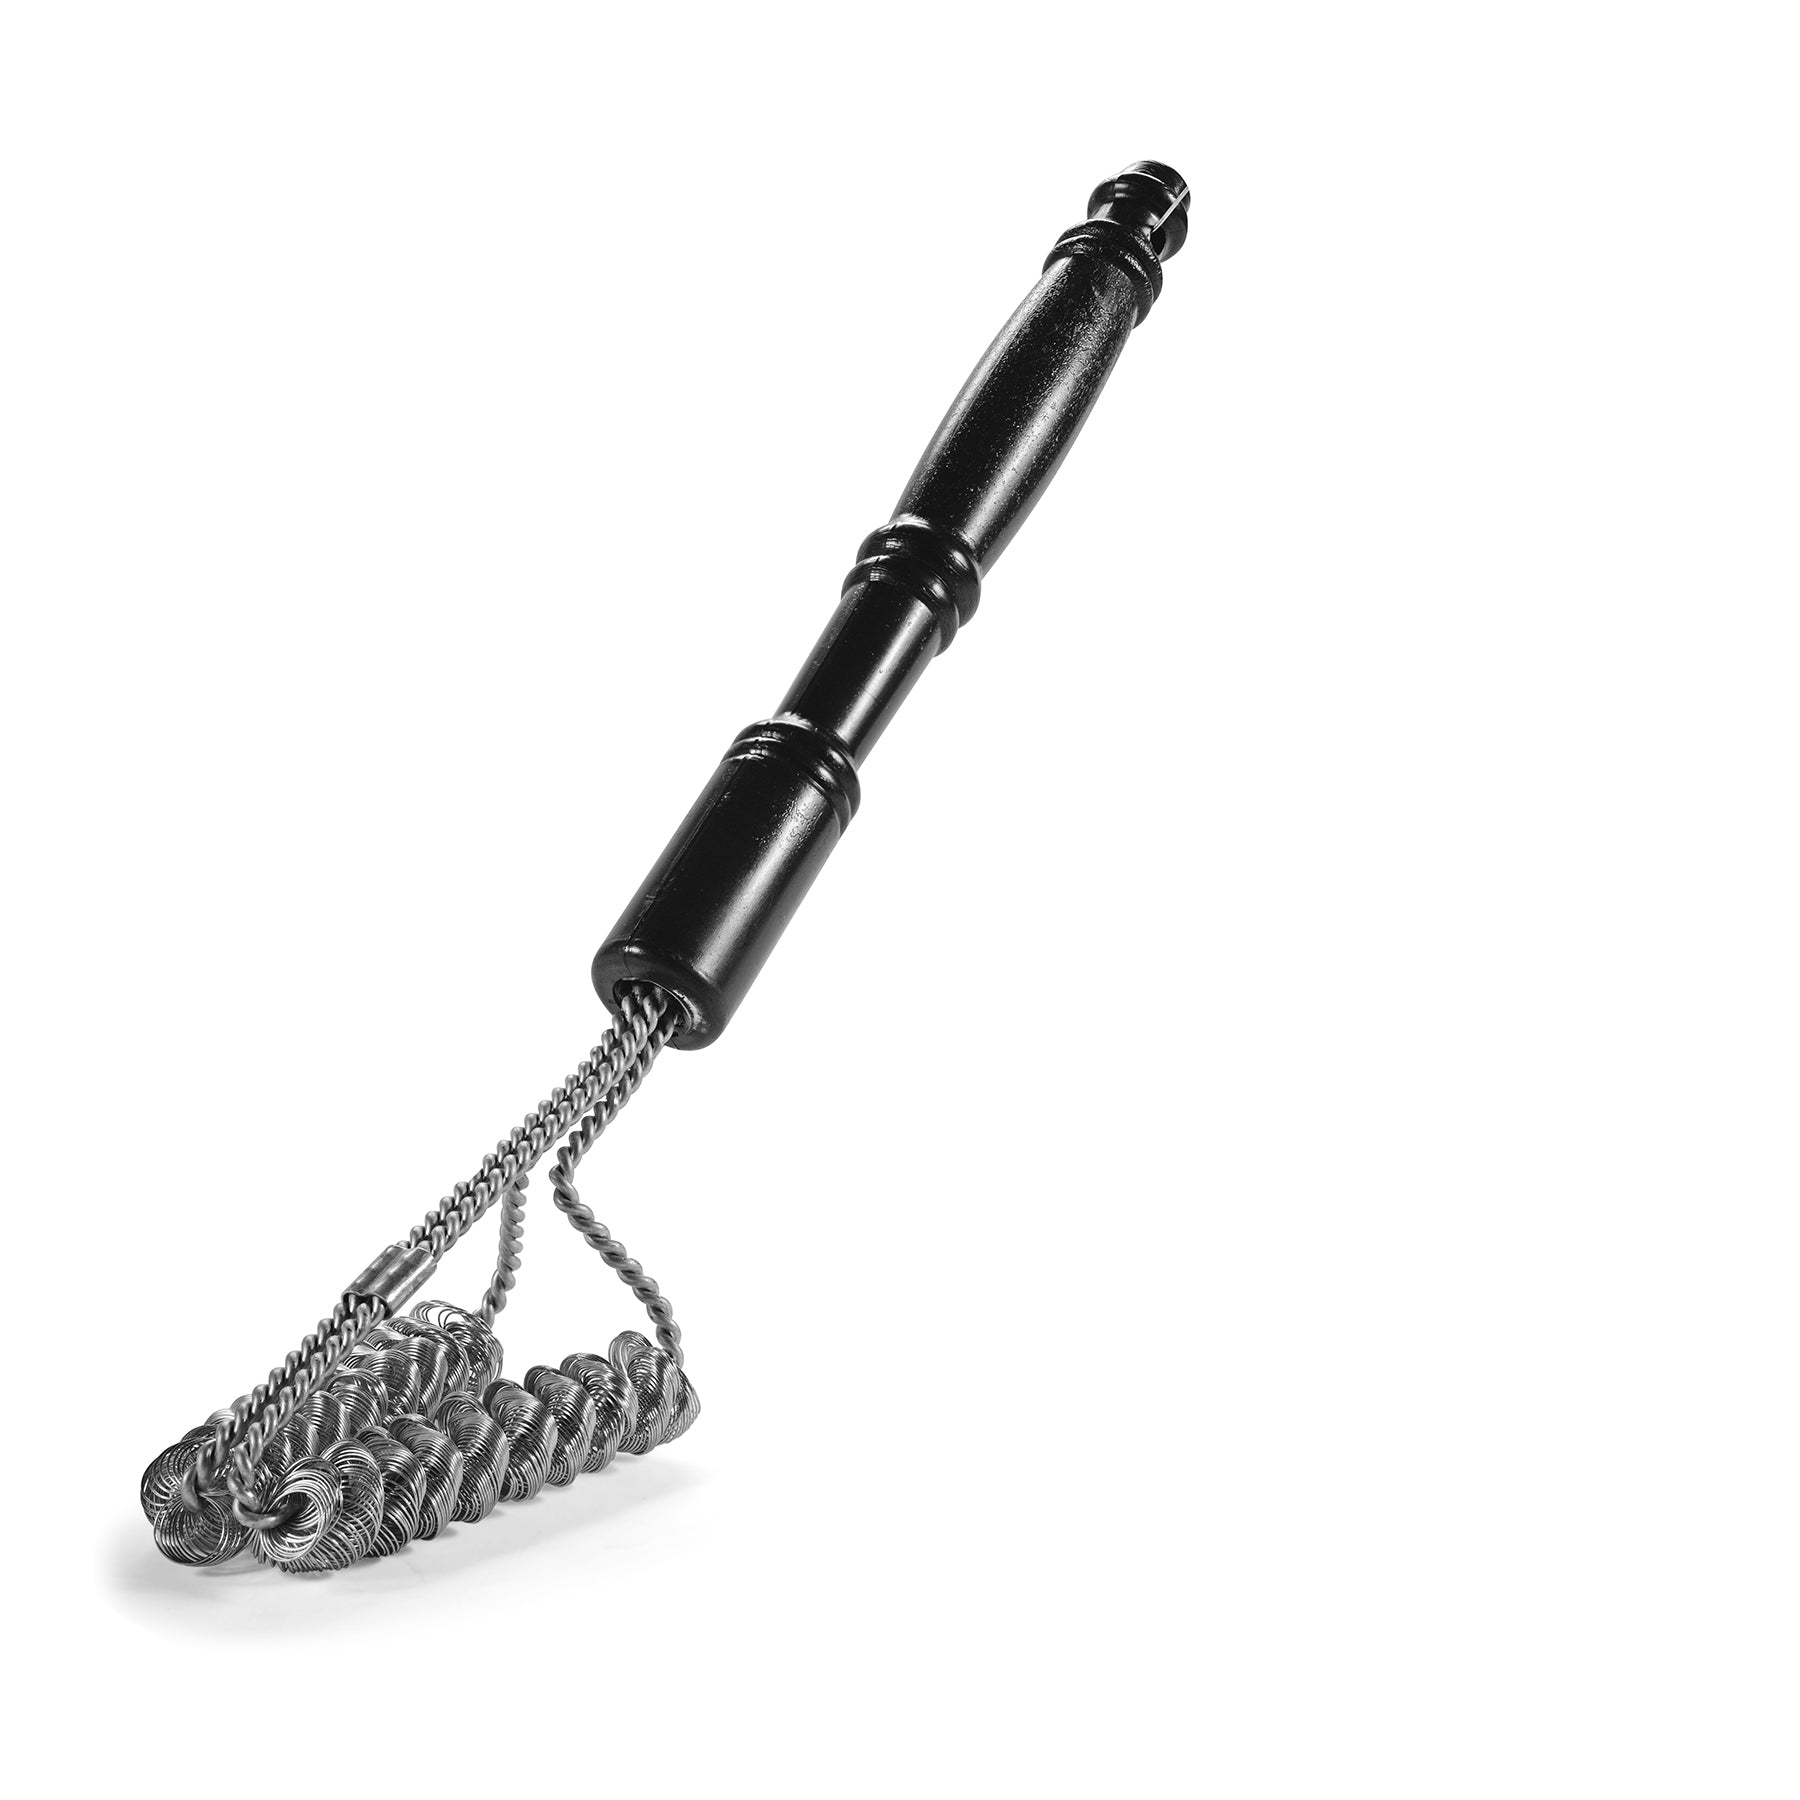 Buy Brushtech 16-Inch Heavy Duty BBQ Grill Cleaning Brush